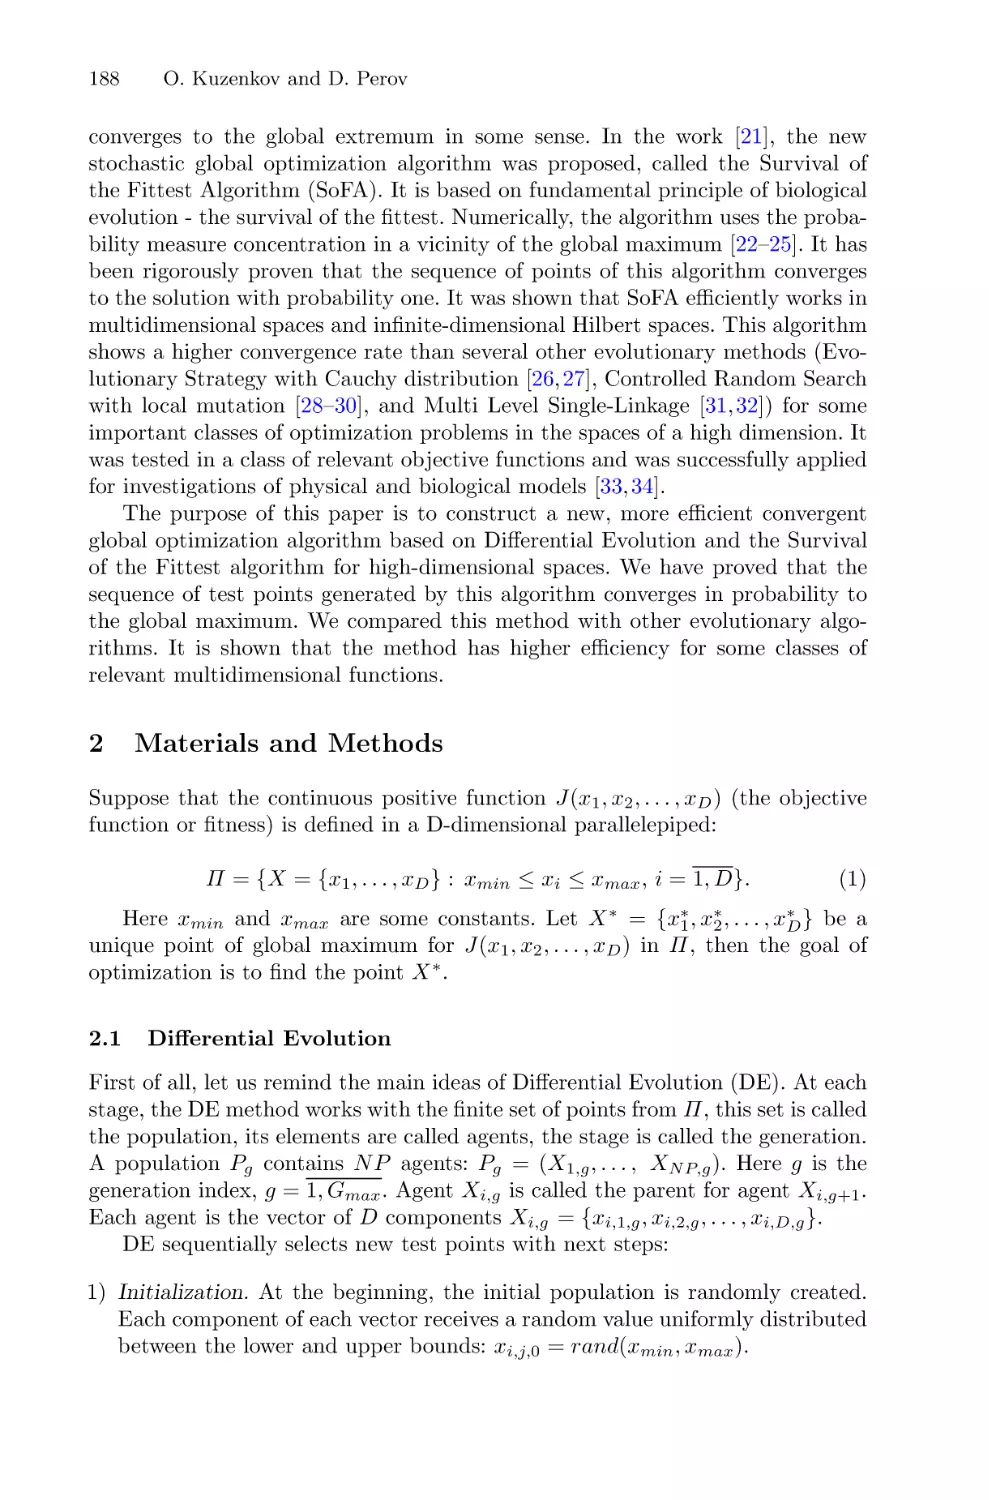 2 Materials and Methods
2.1 Differential Evolution